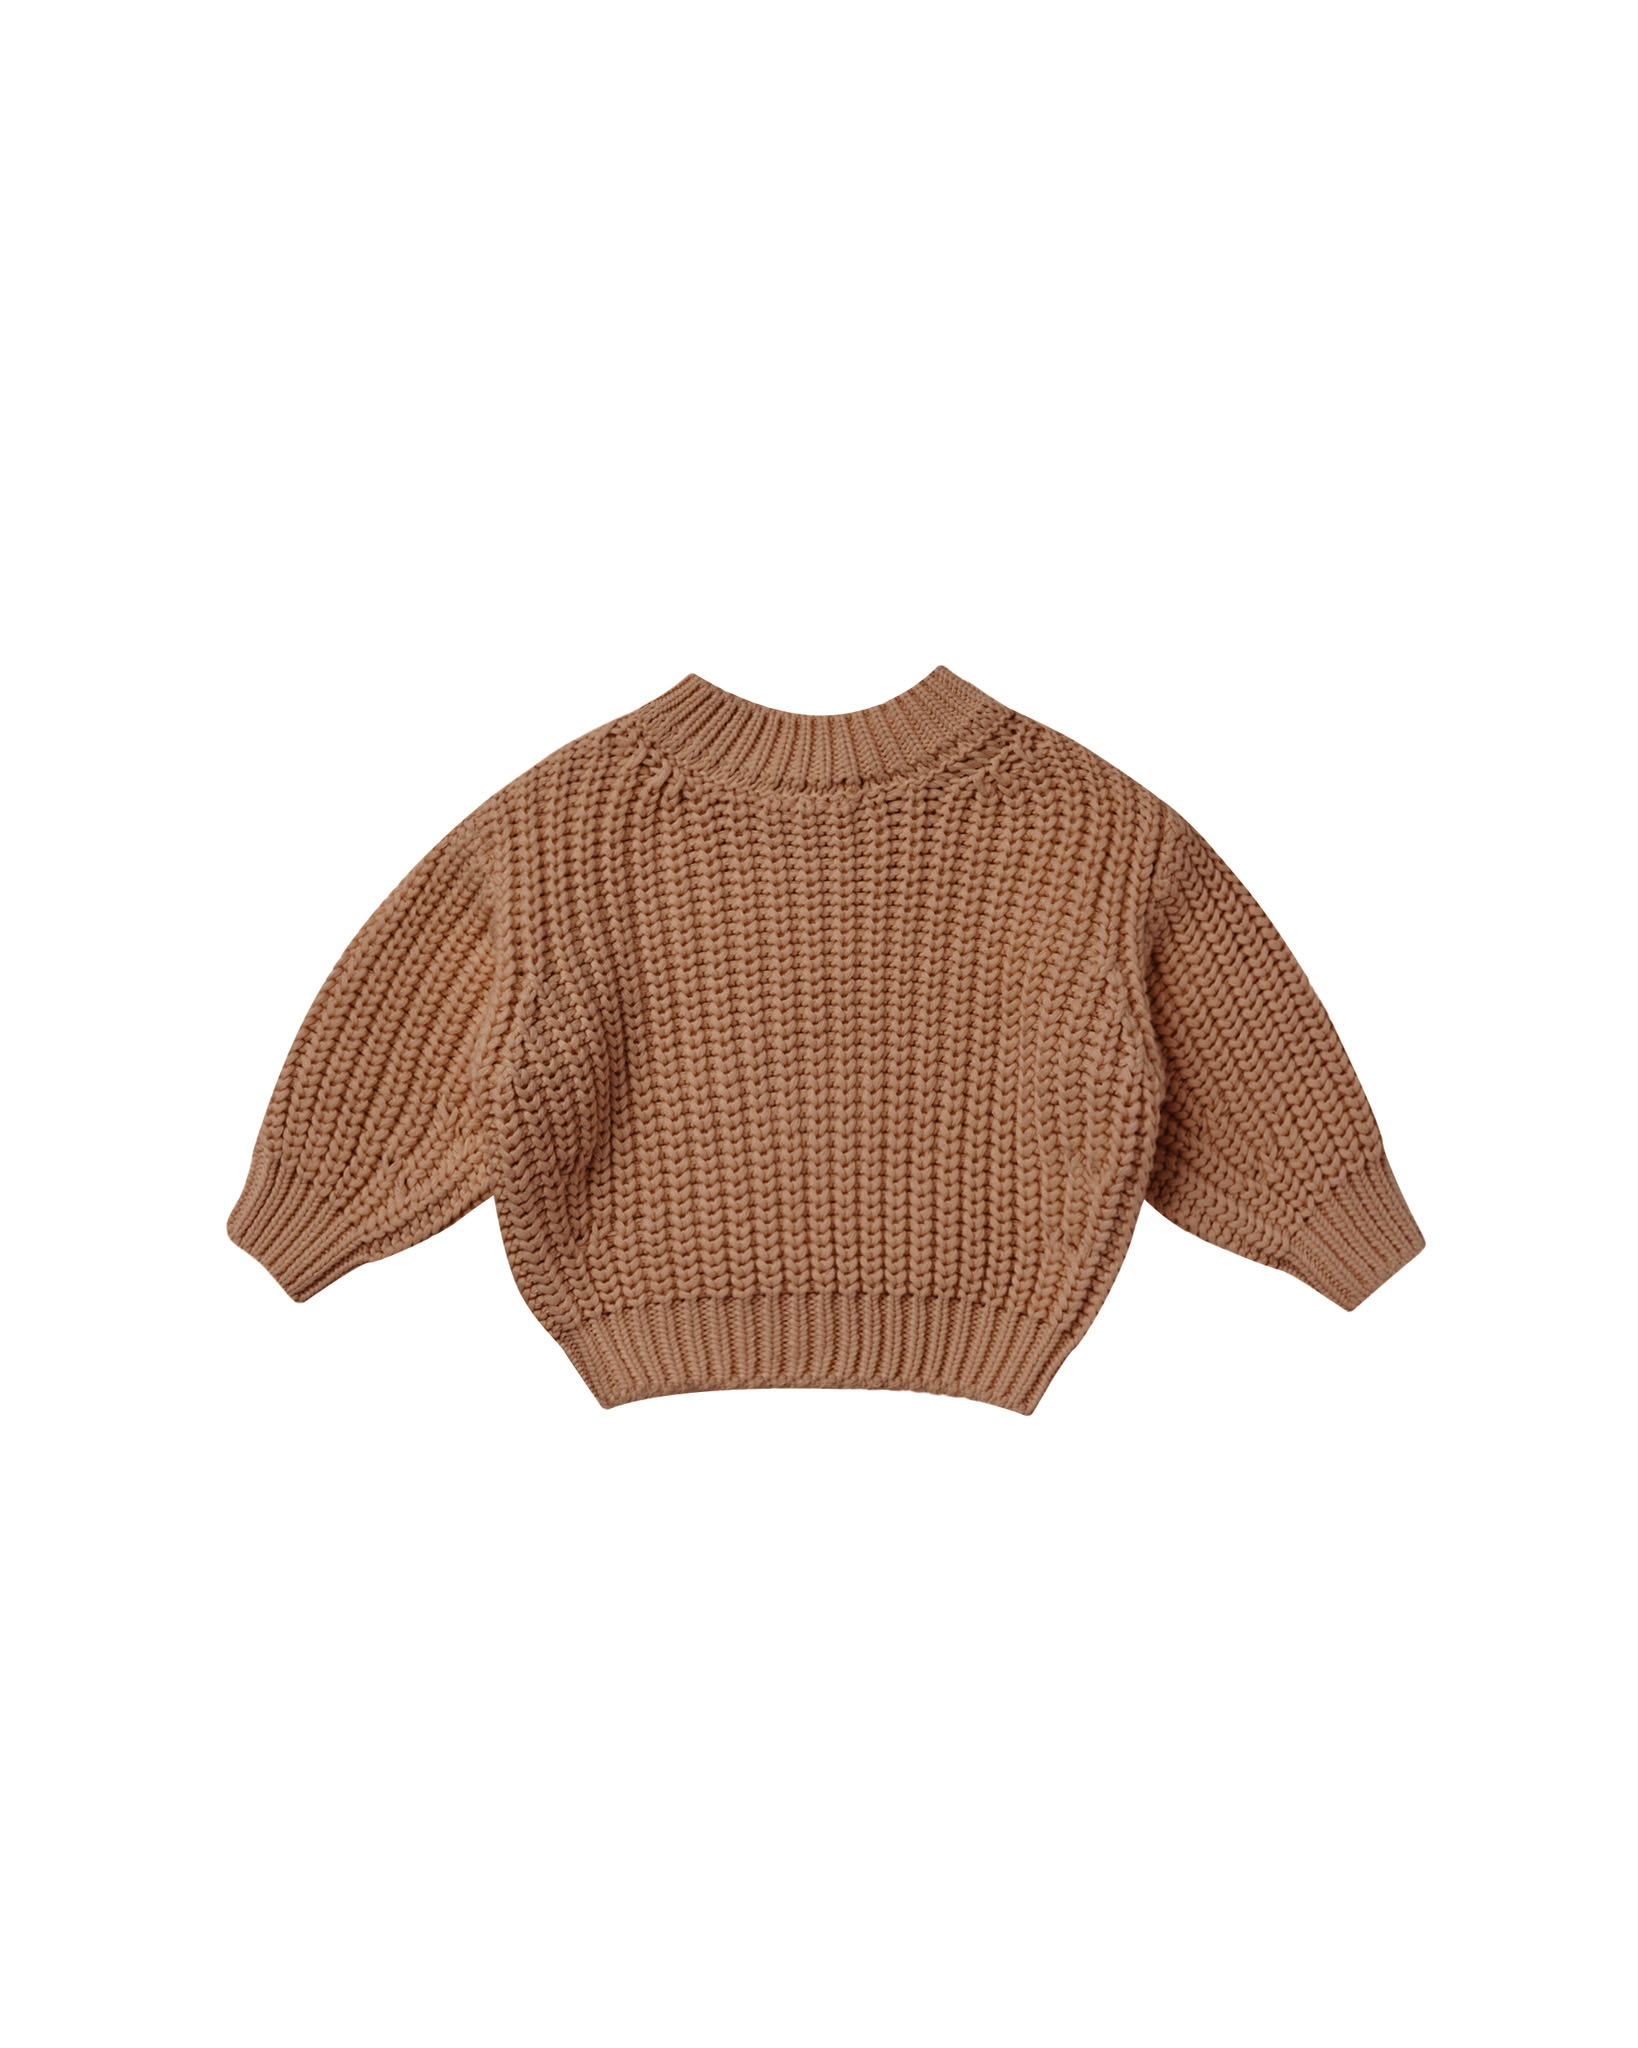 Quincy Mae Chunky Knit Sweater In Cinnamon